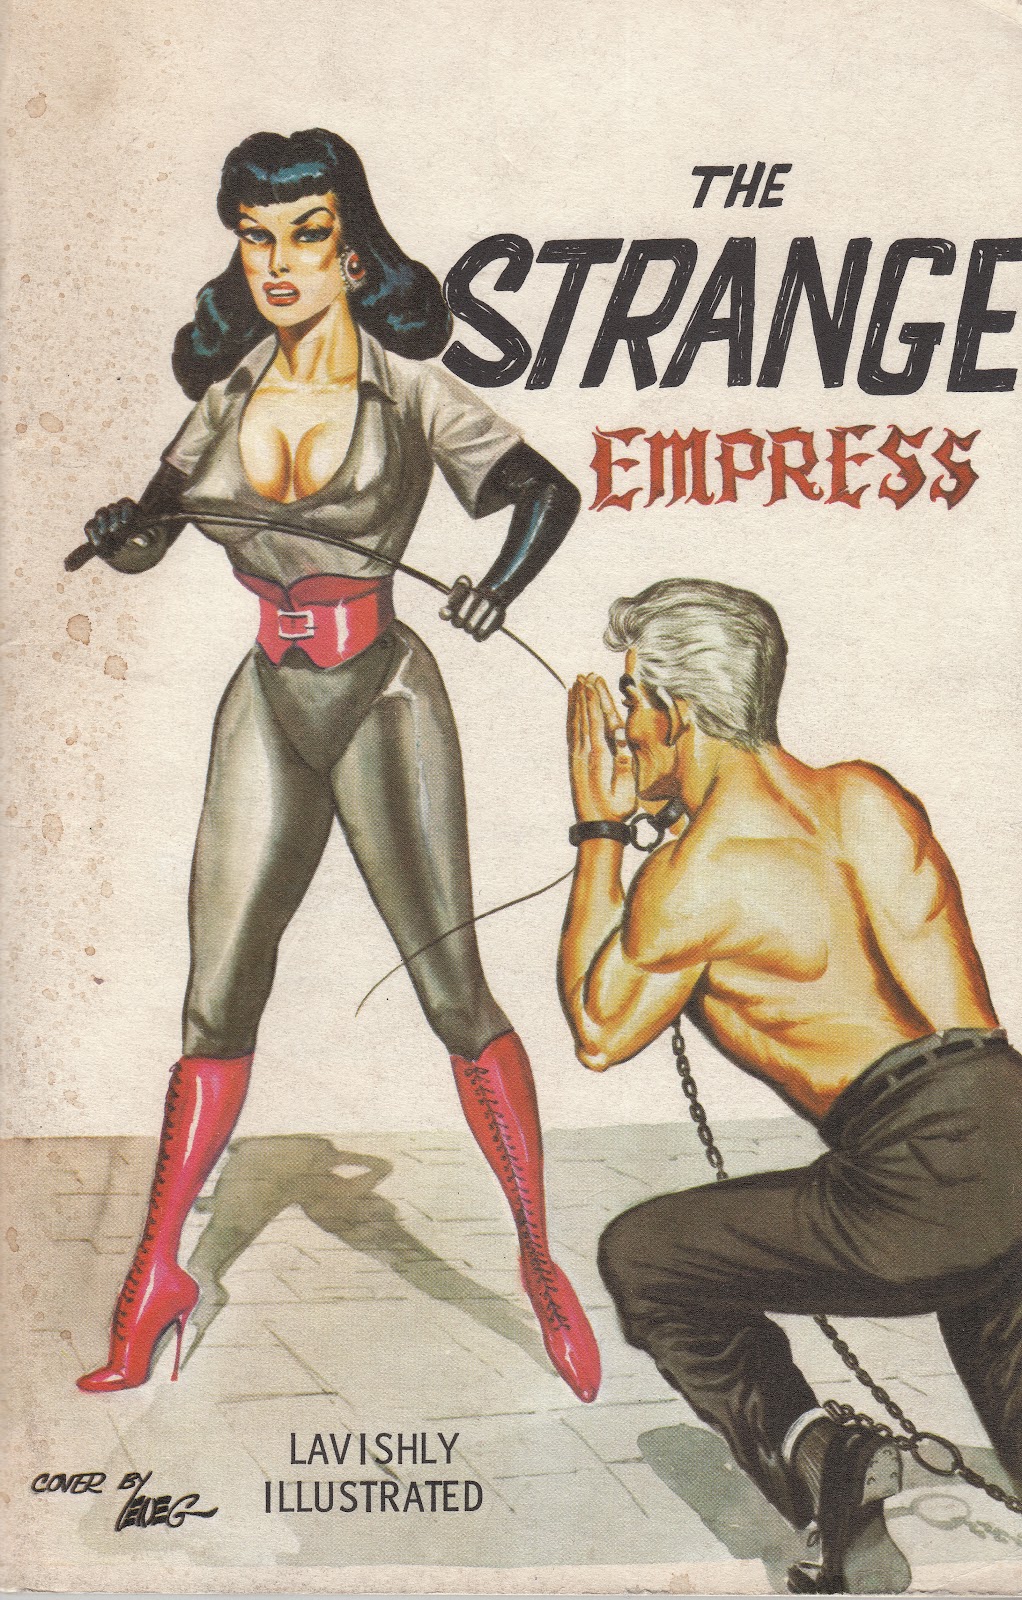 The Strange Empress book cover: woman in knee-high red boots and waist cincher with kneeling man in bondage